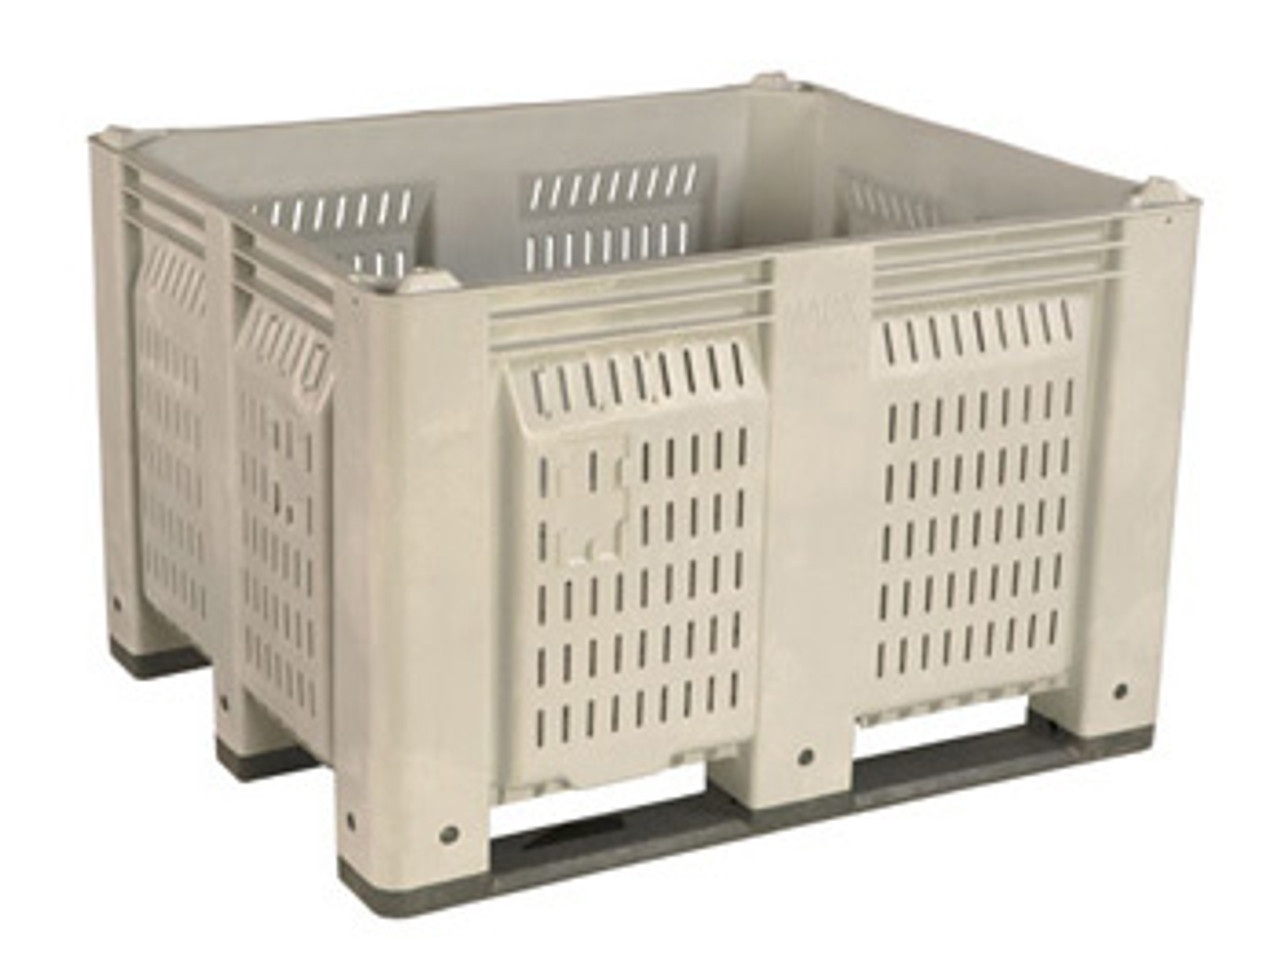 Plastic Shopping Stackable Crates 60 Gallon Storage Container